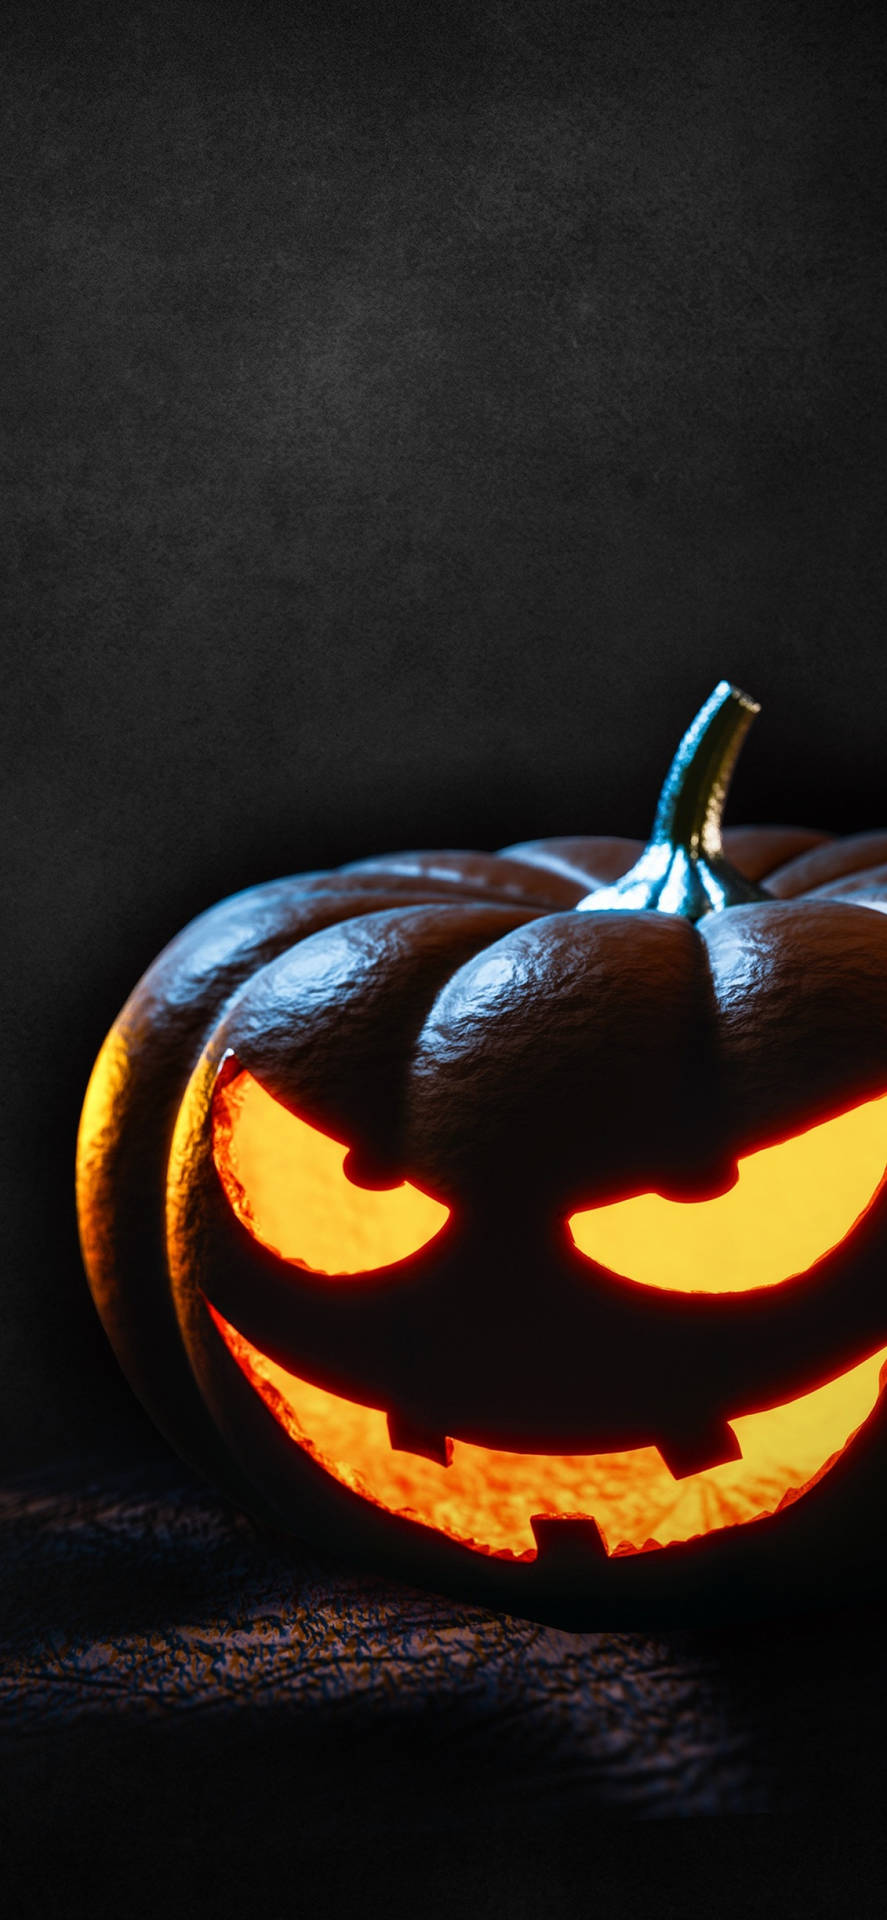 A Pumpkin With Glowing Eyes On A Dark Background Wallpaper